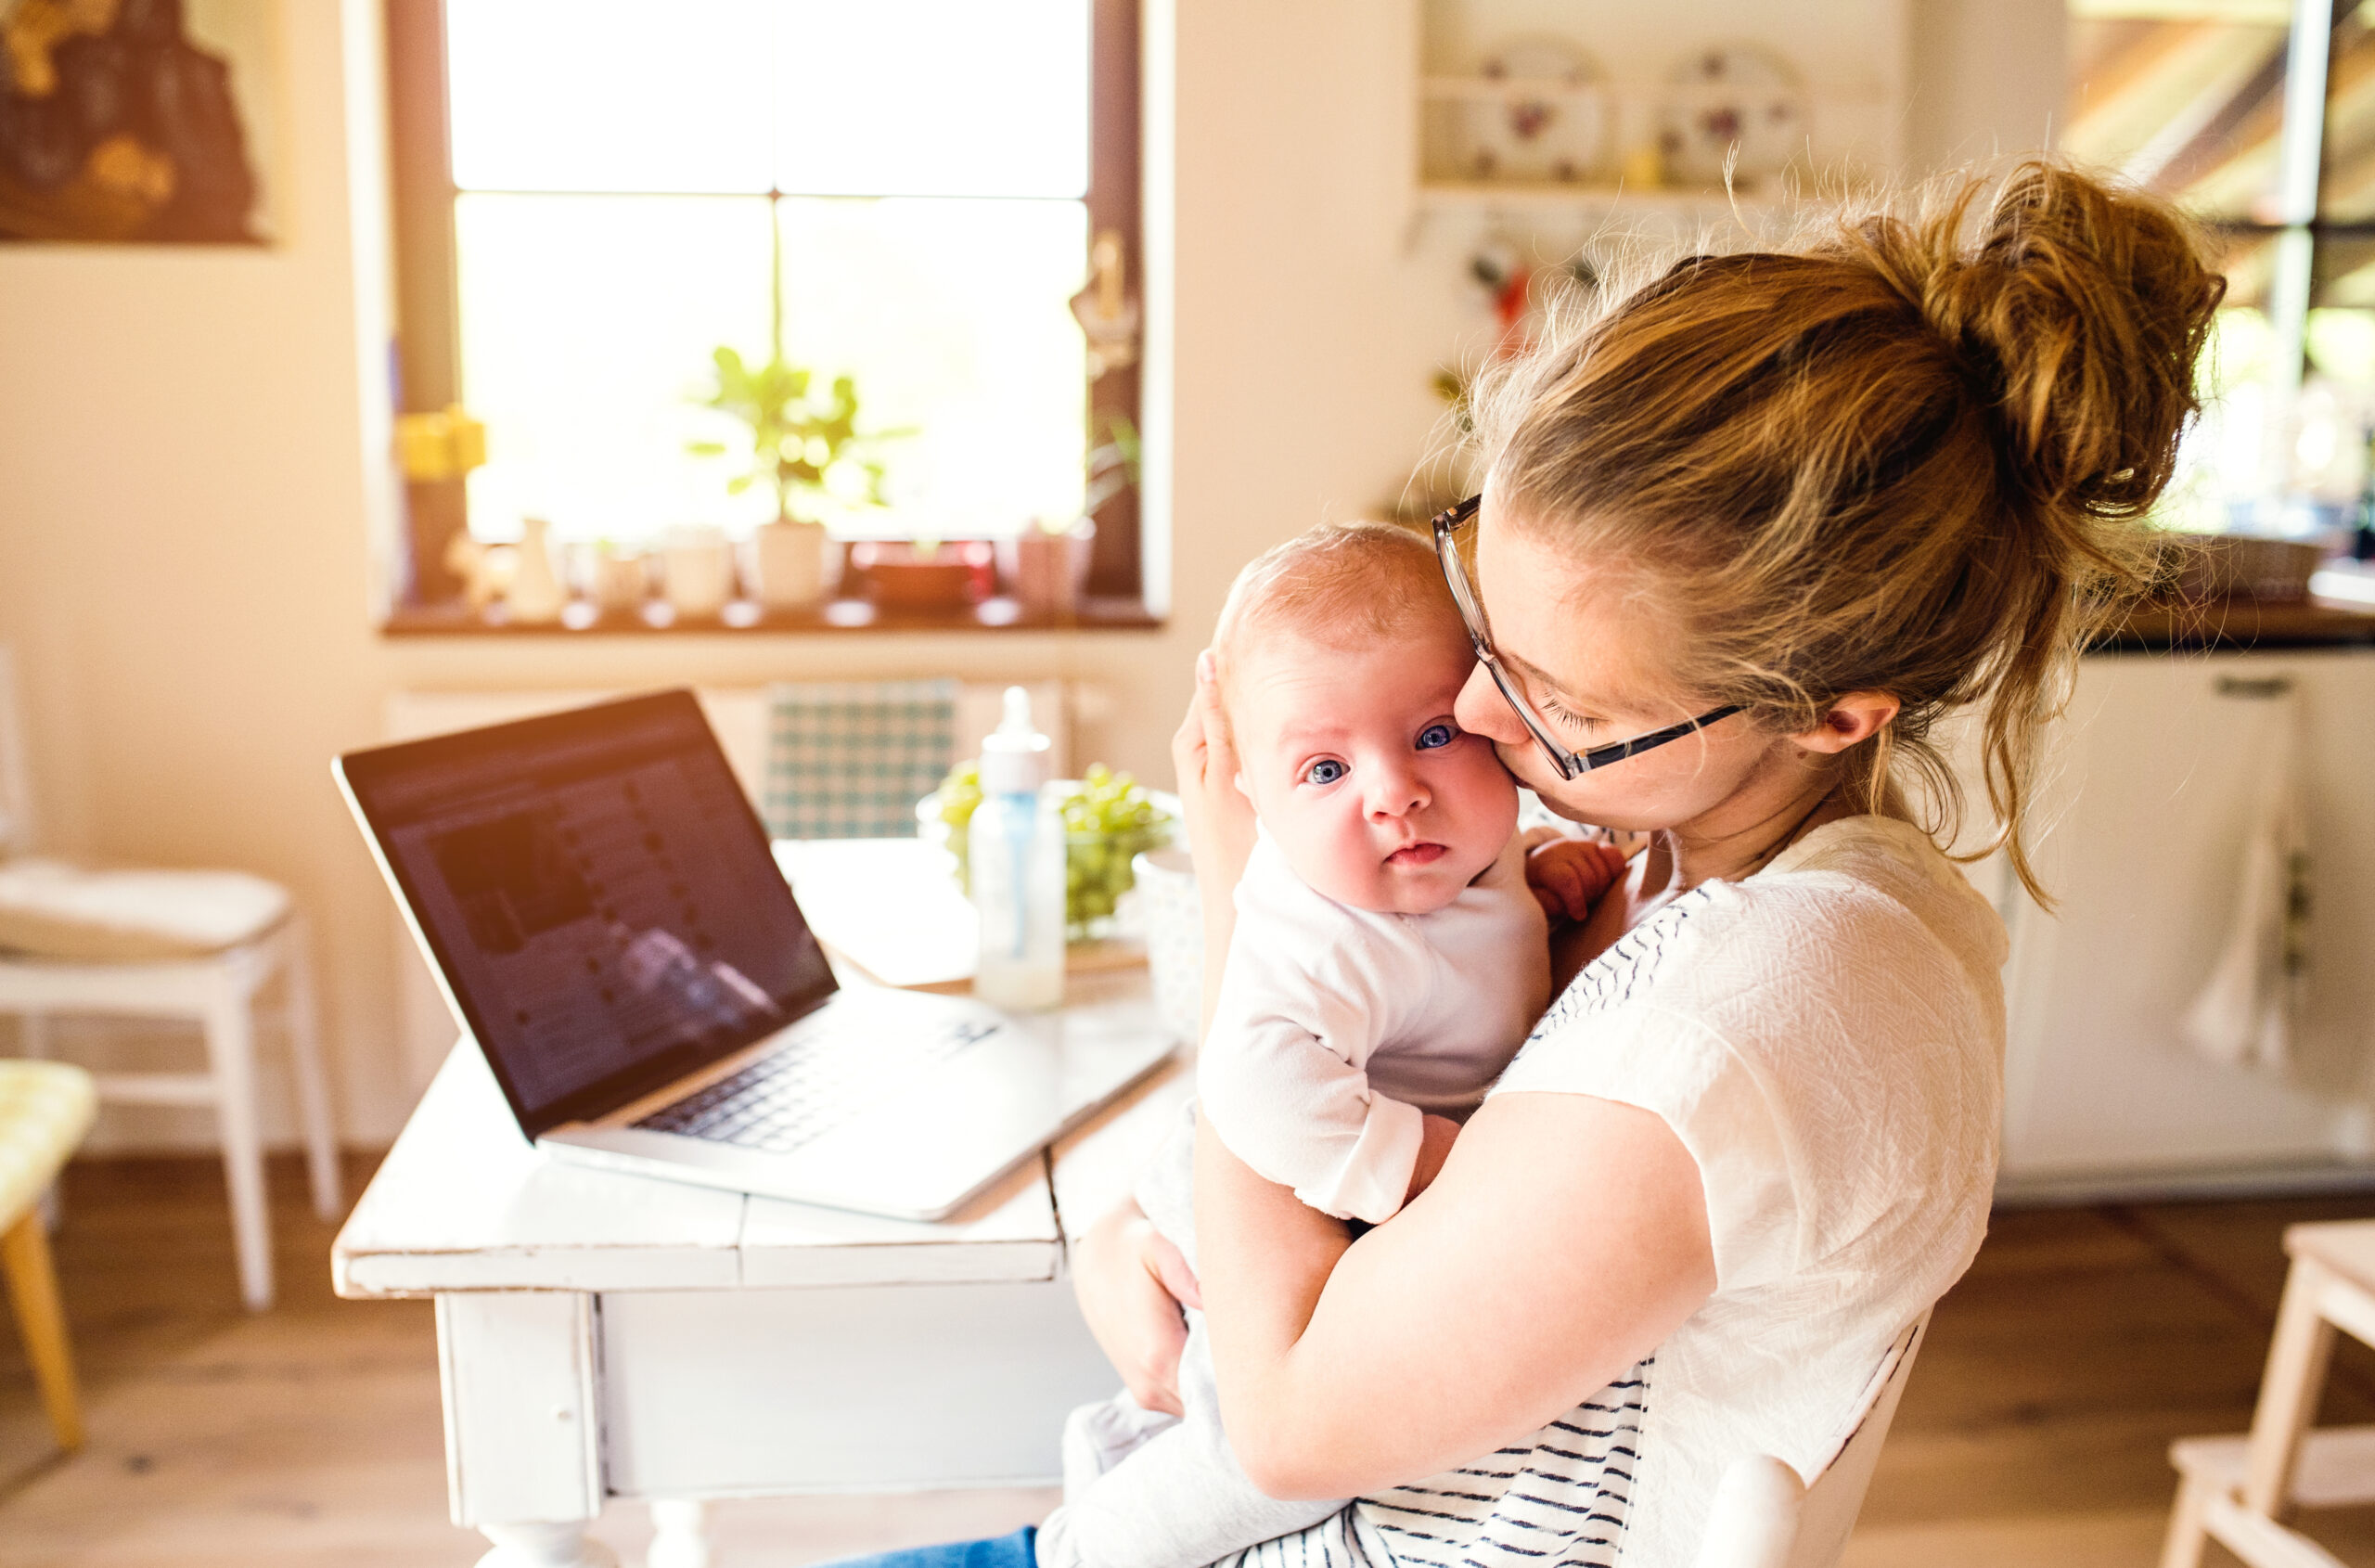 A young woman with glasses, holding a baby, stands near a laptop on a table in a bright, cozy kitchen.